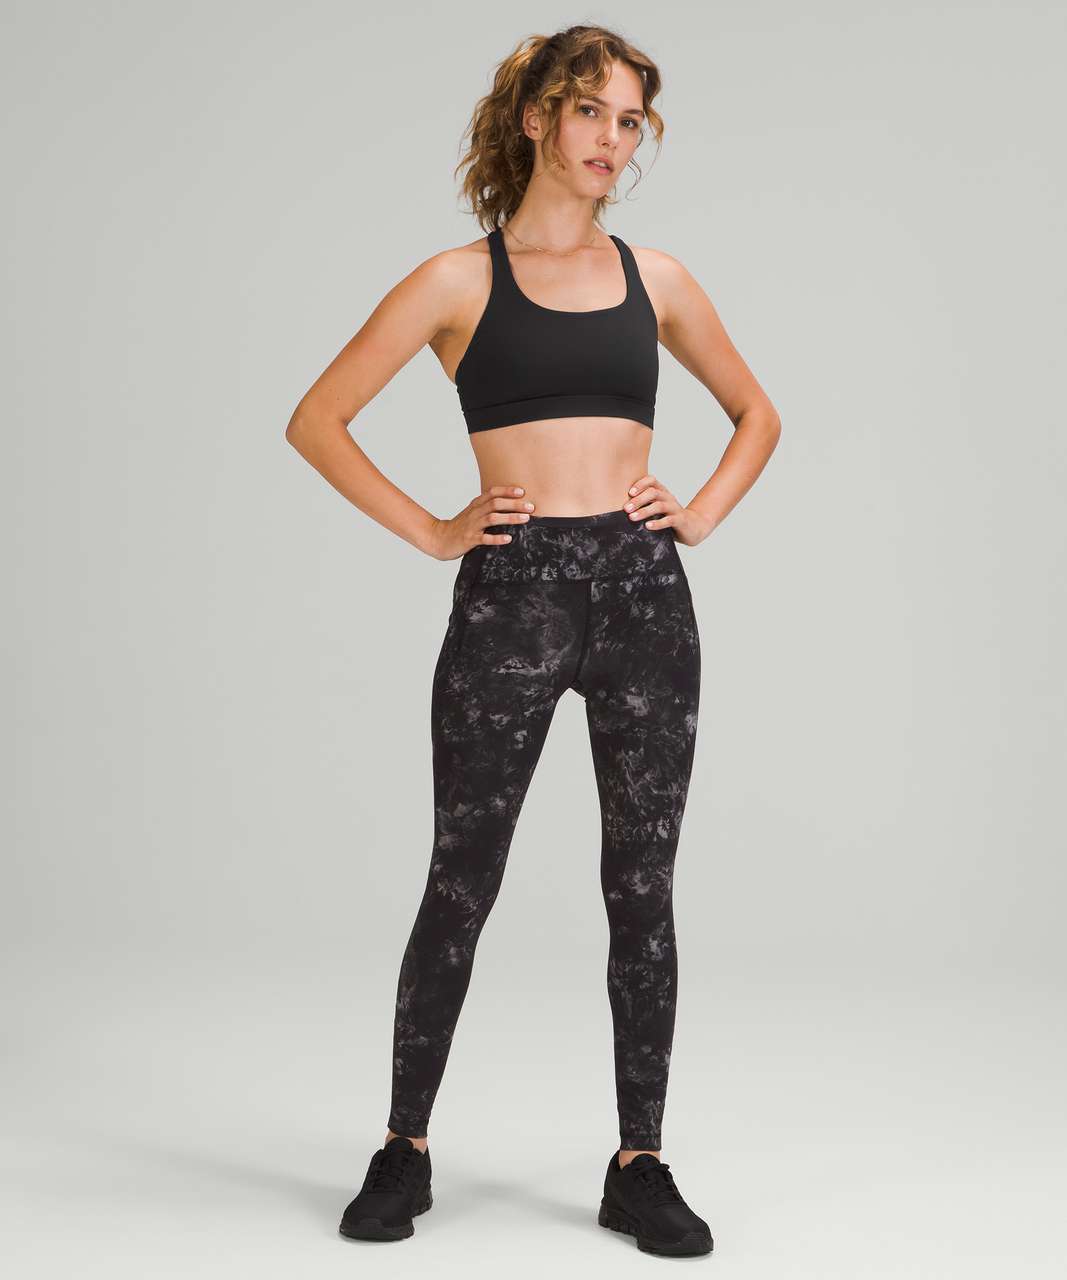 Lululemon Energy Bra High Support 34D Black Size 34 D - $30 (48% Off  Retail) - From Maya